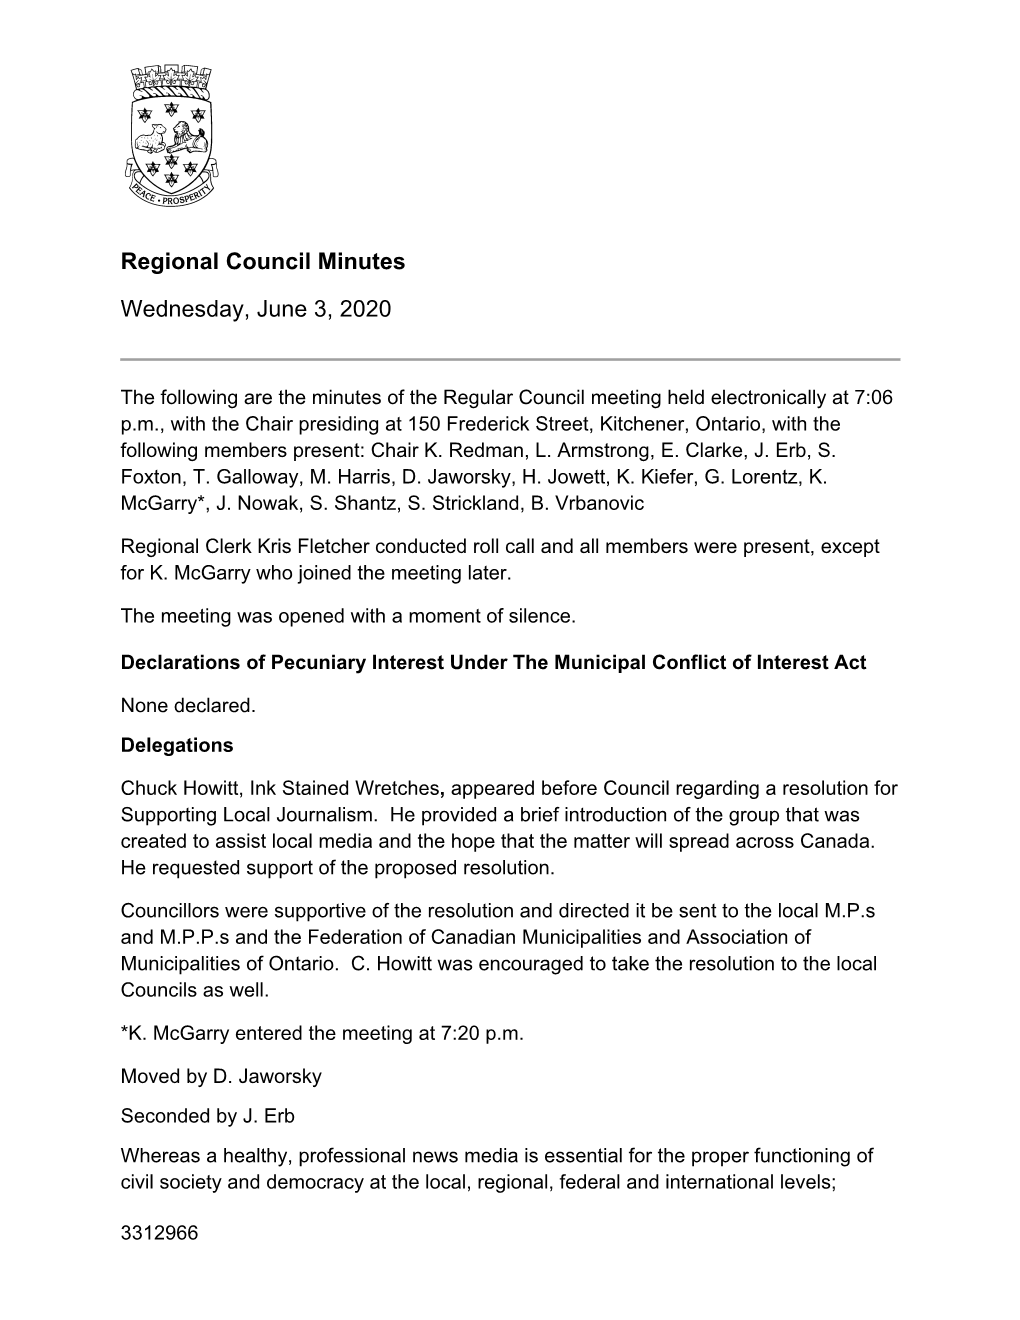 Regional Council Minutes Wednesday, June 3, 2020